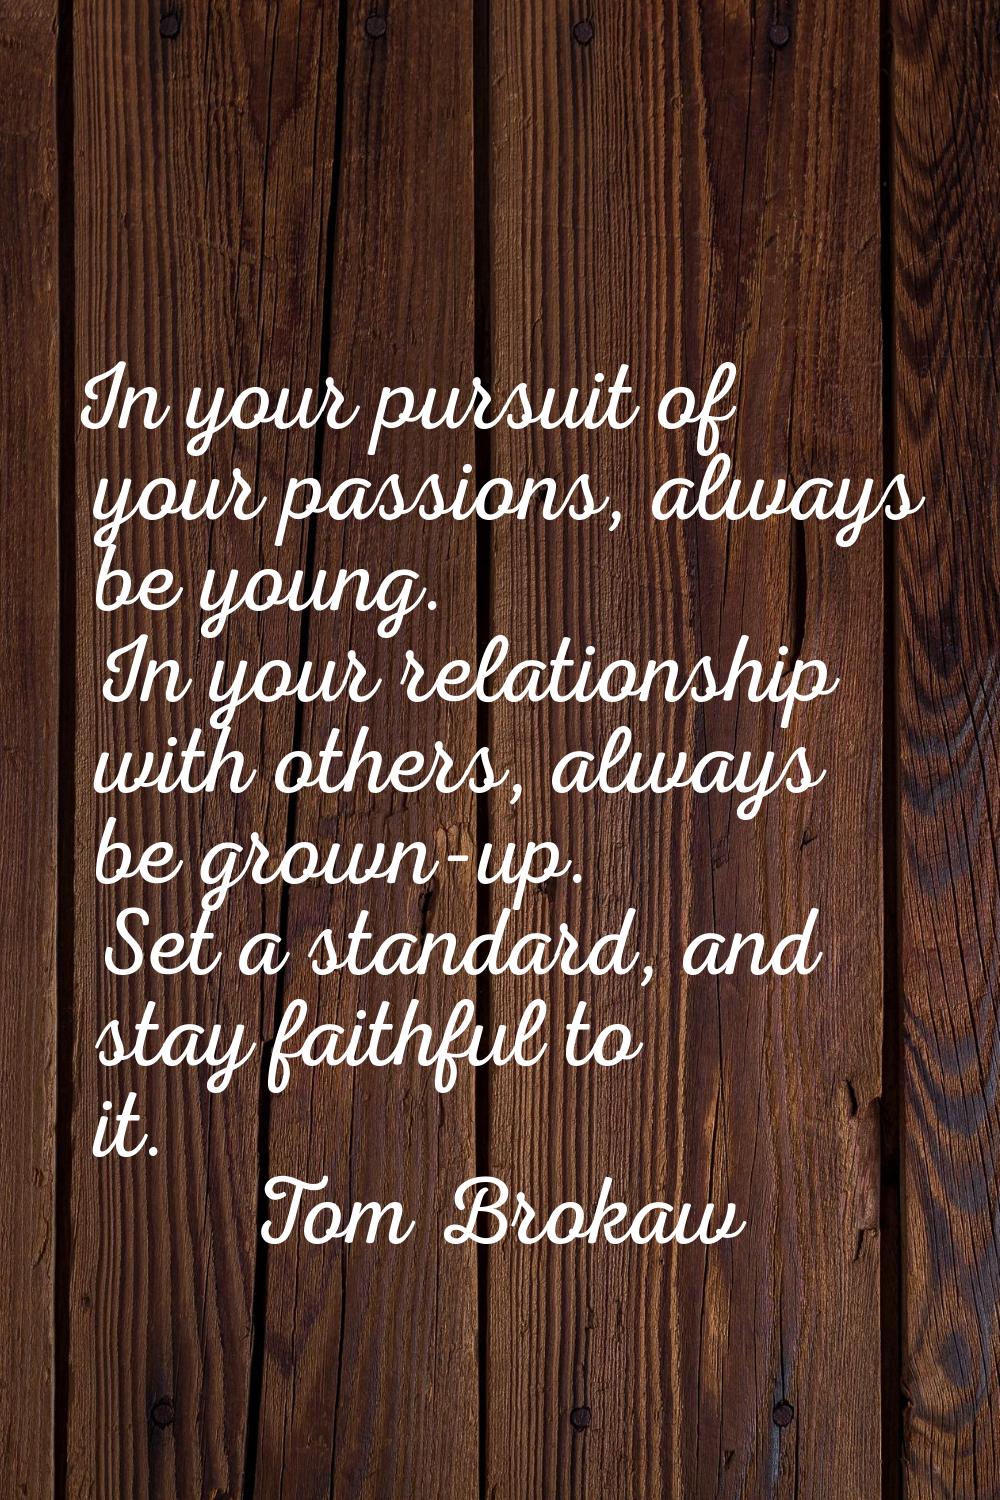 In your pursuit of your passions, always be young. In your relationship with others, always be grow